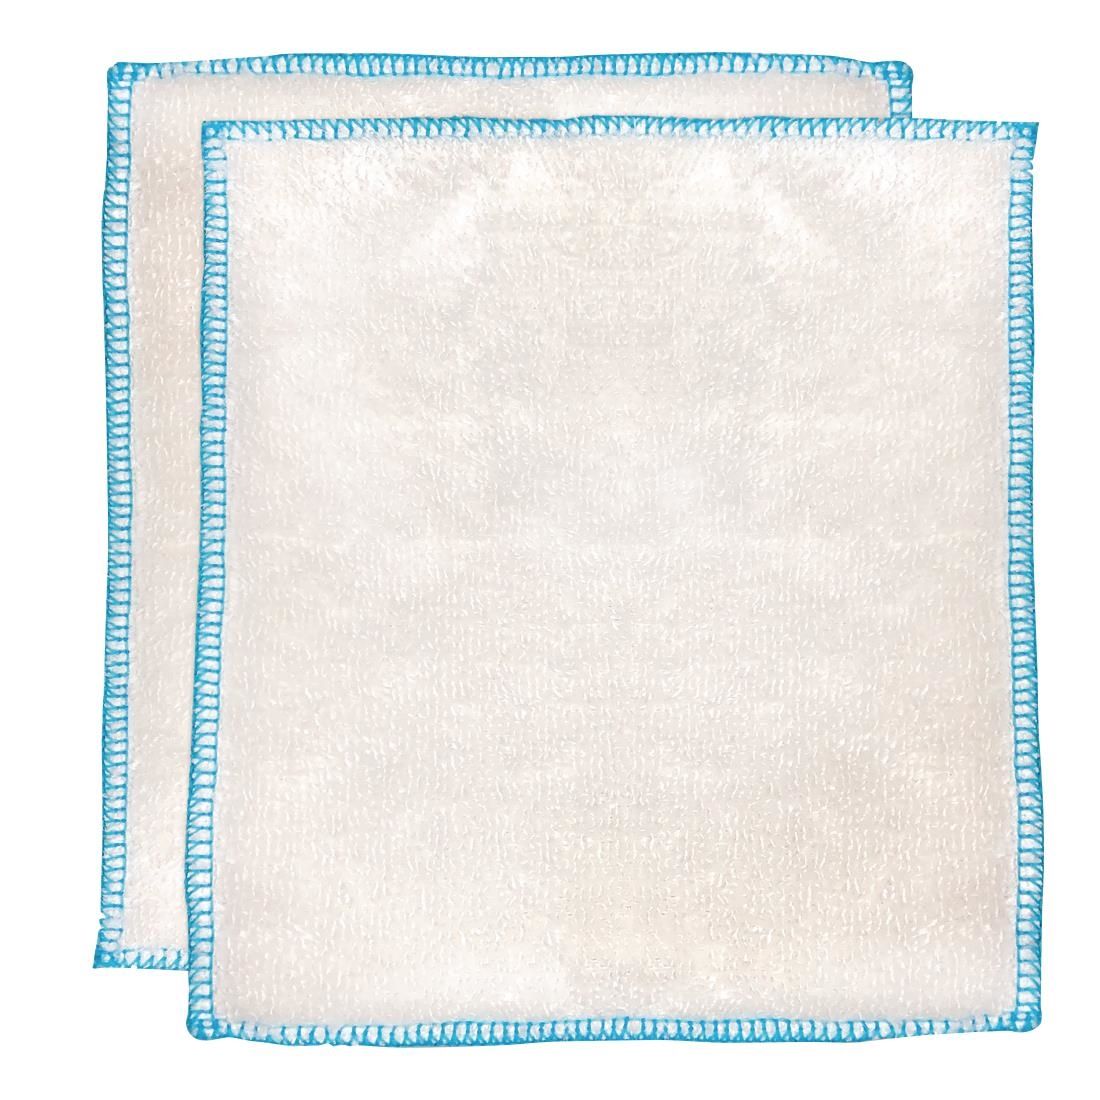 DA569 Puracycle Biodegradable Bamboo Cleaning Cloths (Pack of 2)